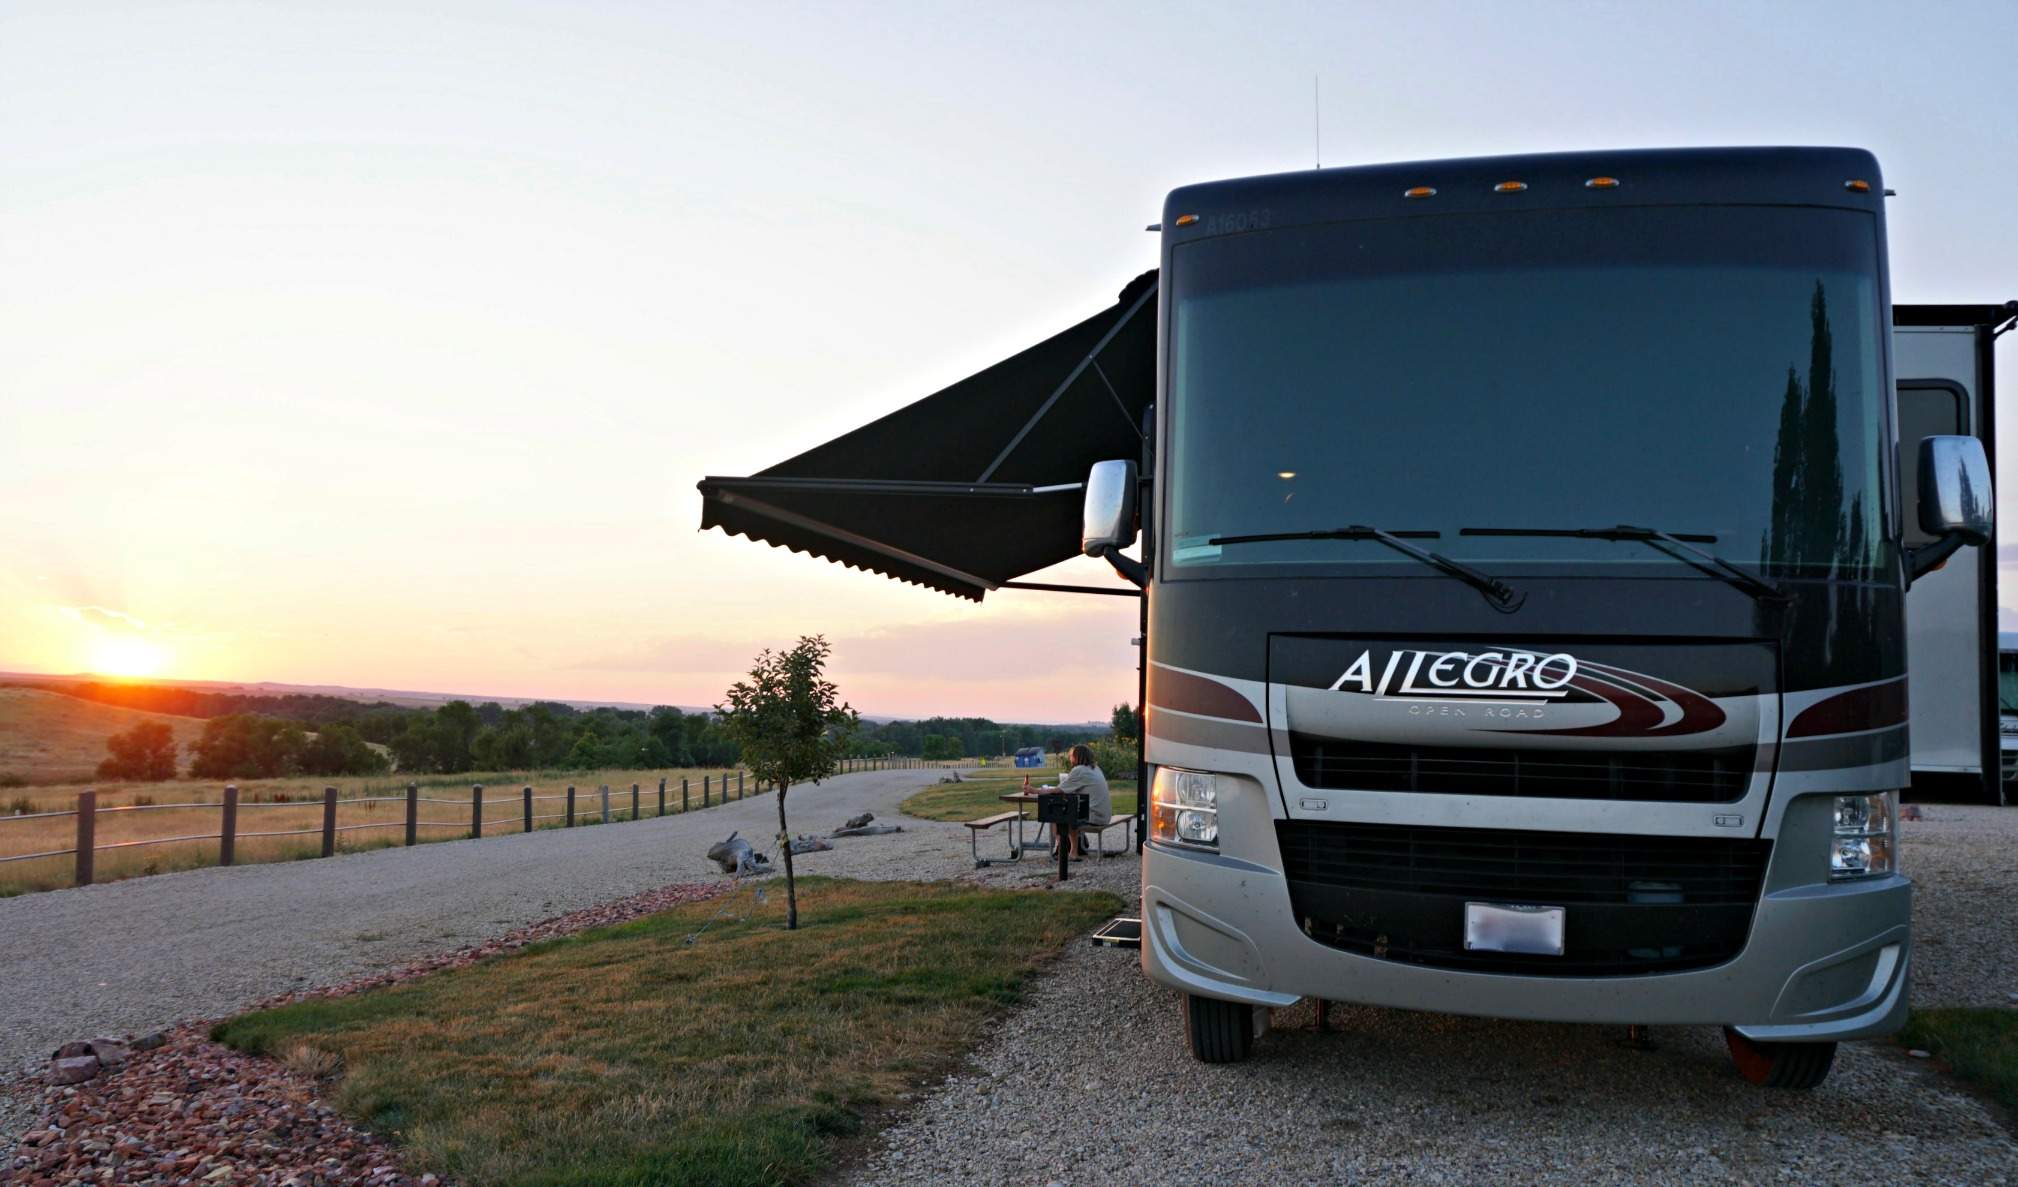 5 Reasons You Should Rent an RV Before Buying One